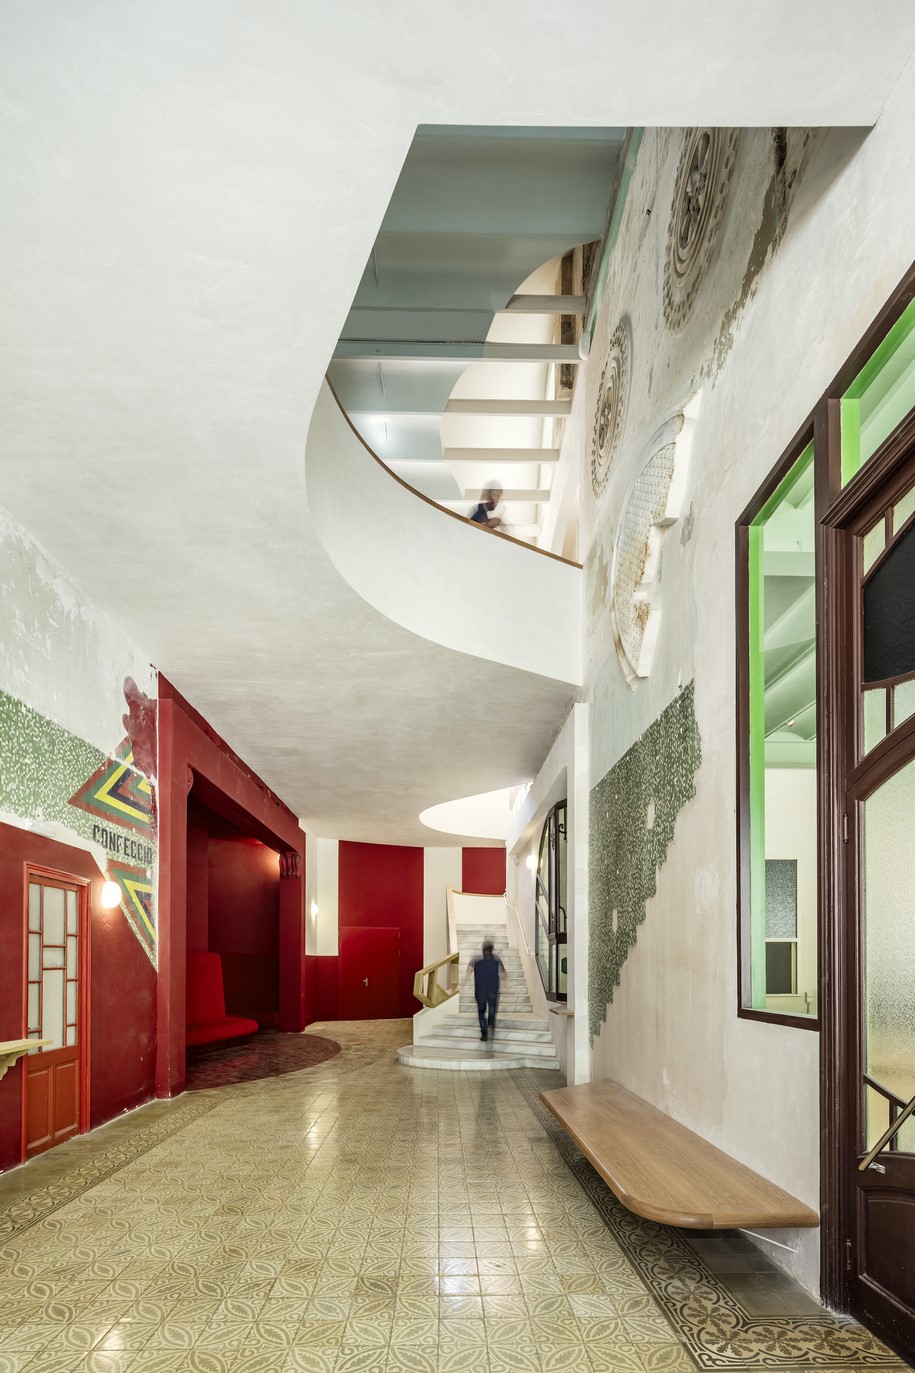 Archisearch Old and new coexists in Sala Beckett theatre | Flores & Prats